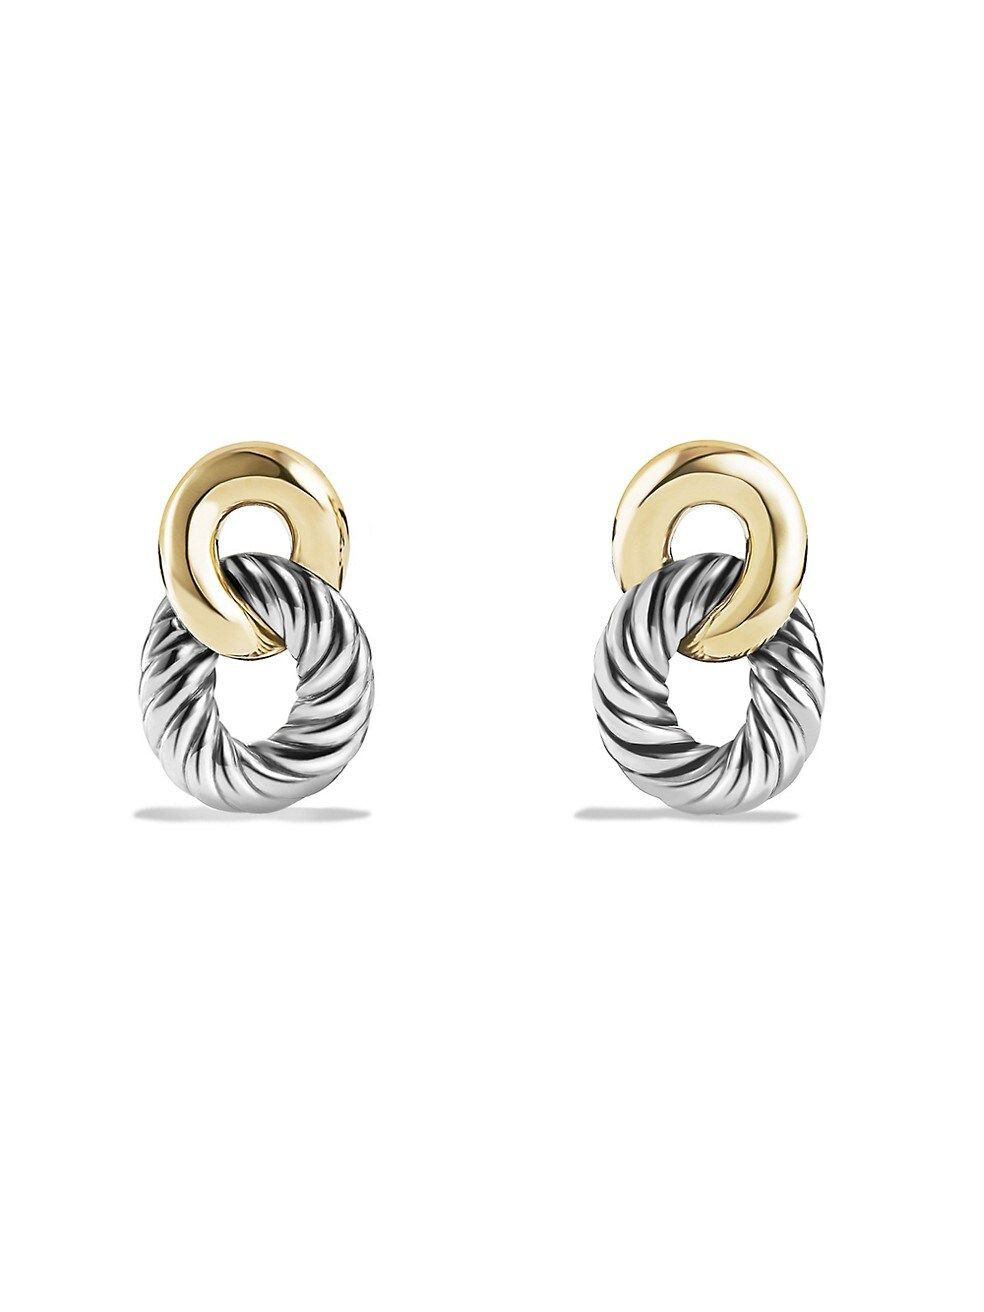 Belmont Curb Link Drop Earrings with 18K Yellow Gold | Saks Fifth Avenue